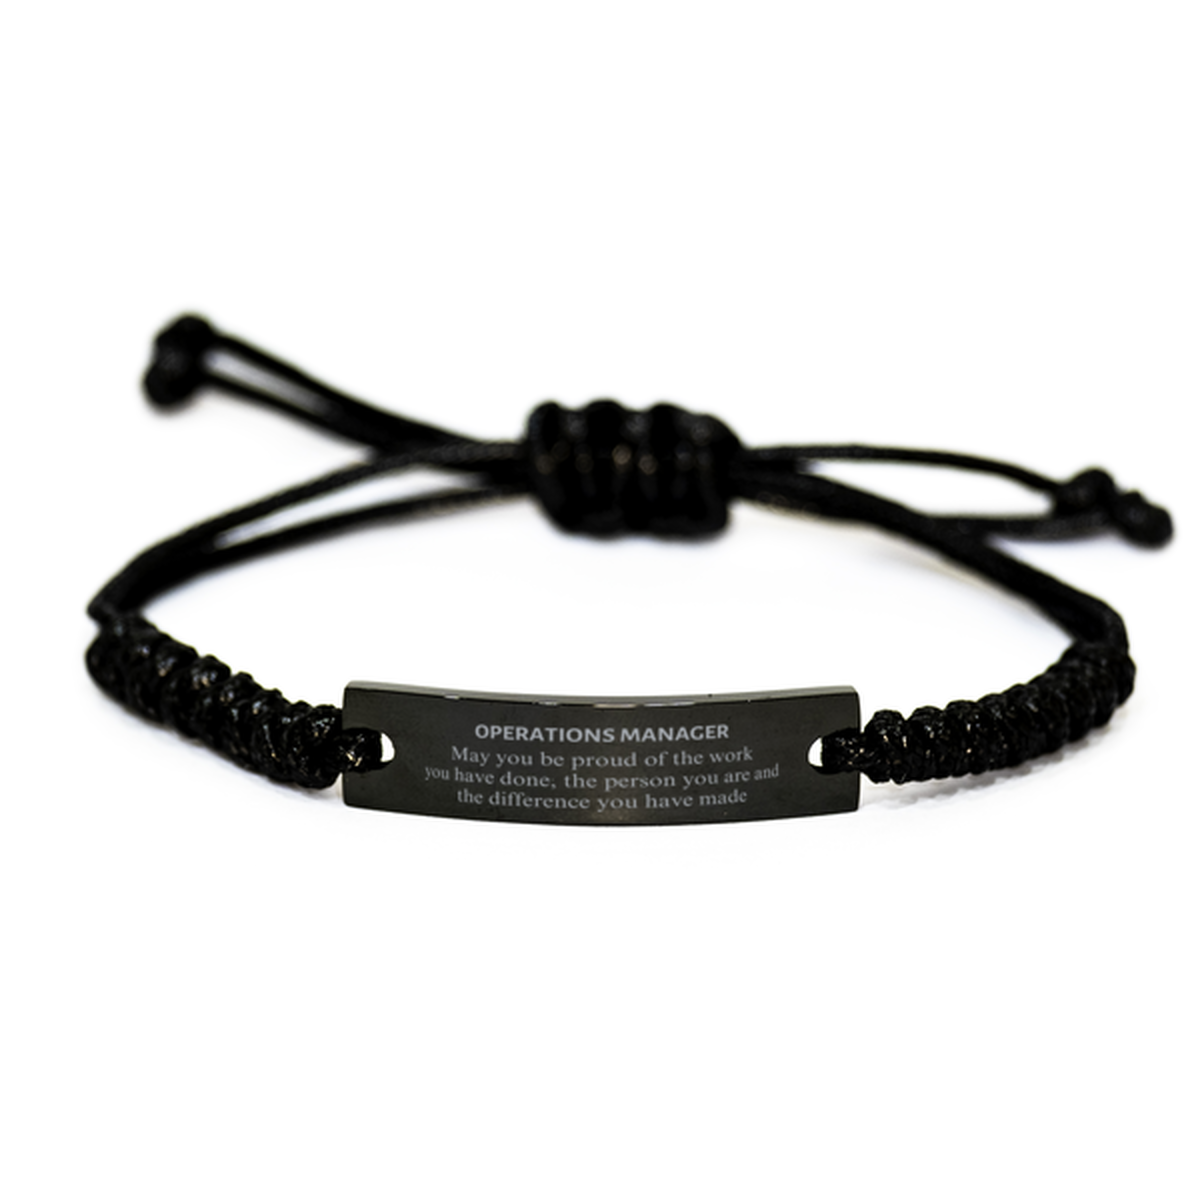 Operations Manager May you be proud of the work you have done, Retirement Operations Manager Black Rope Bracelet for Colleague Appreciation Gifts Amazing for Operations Manager